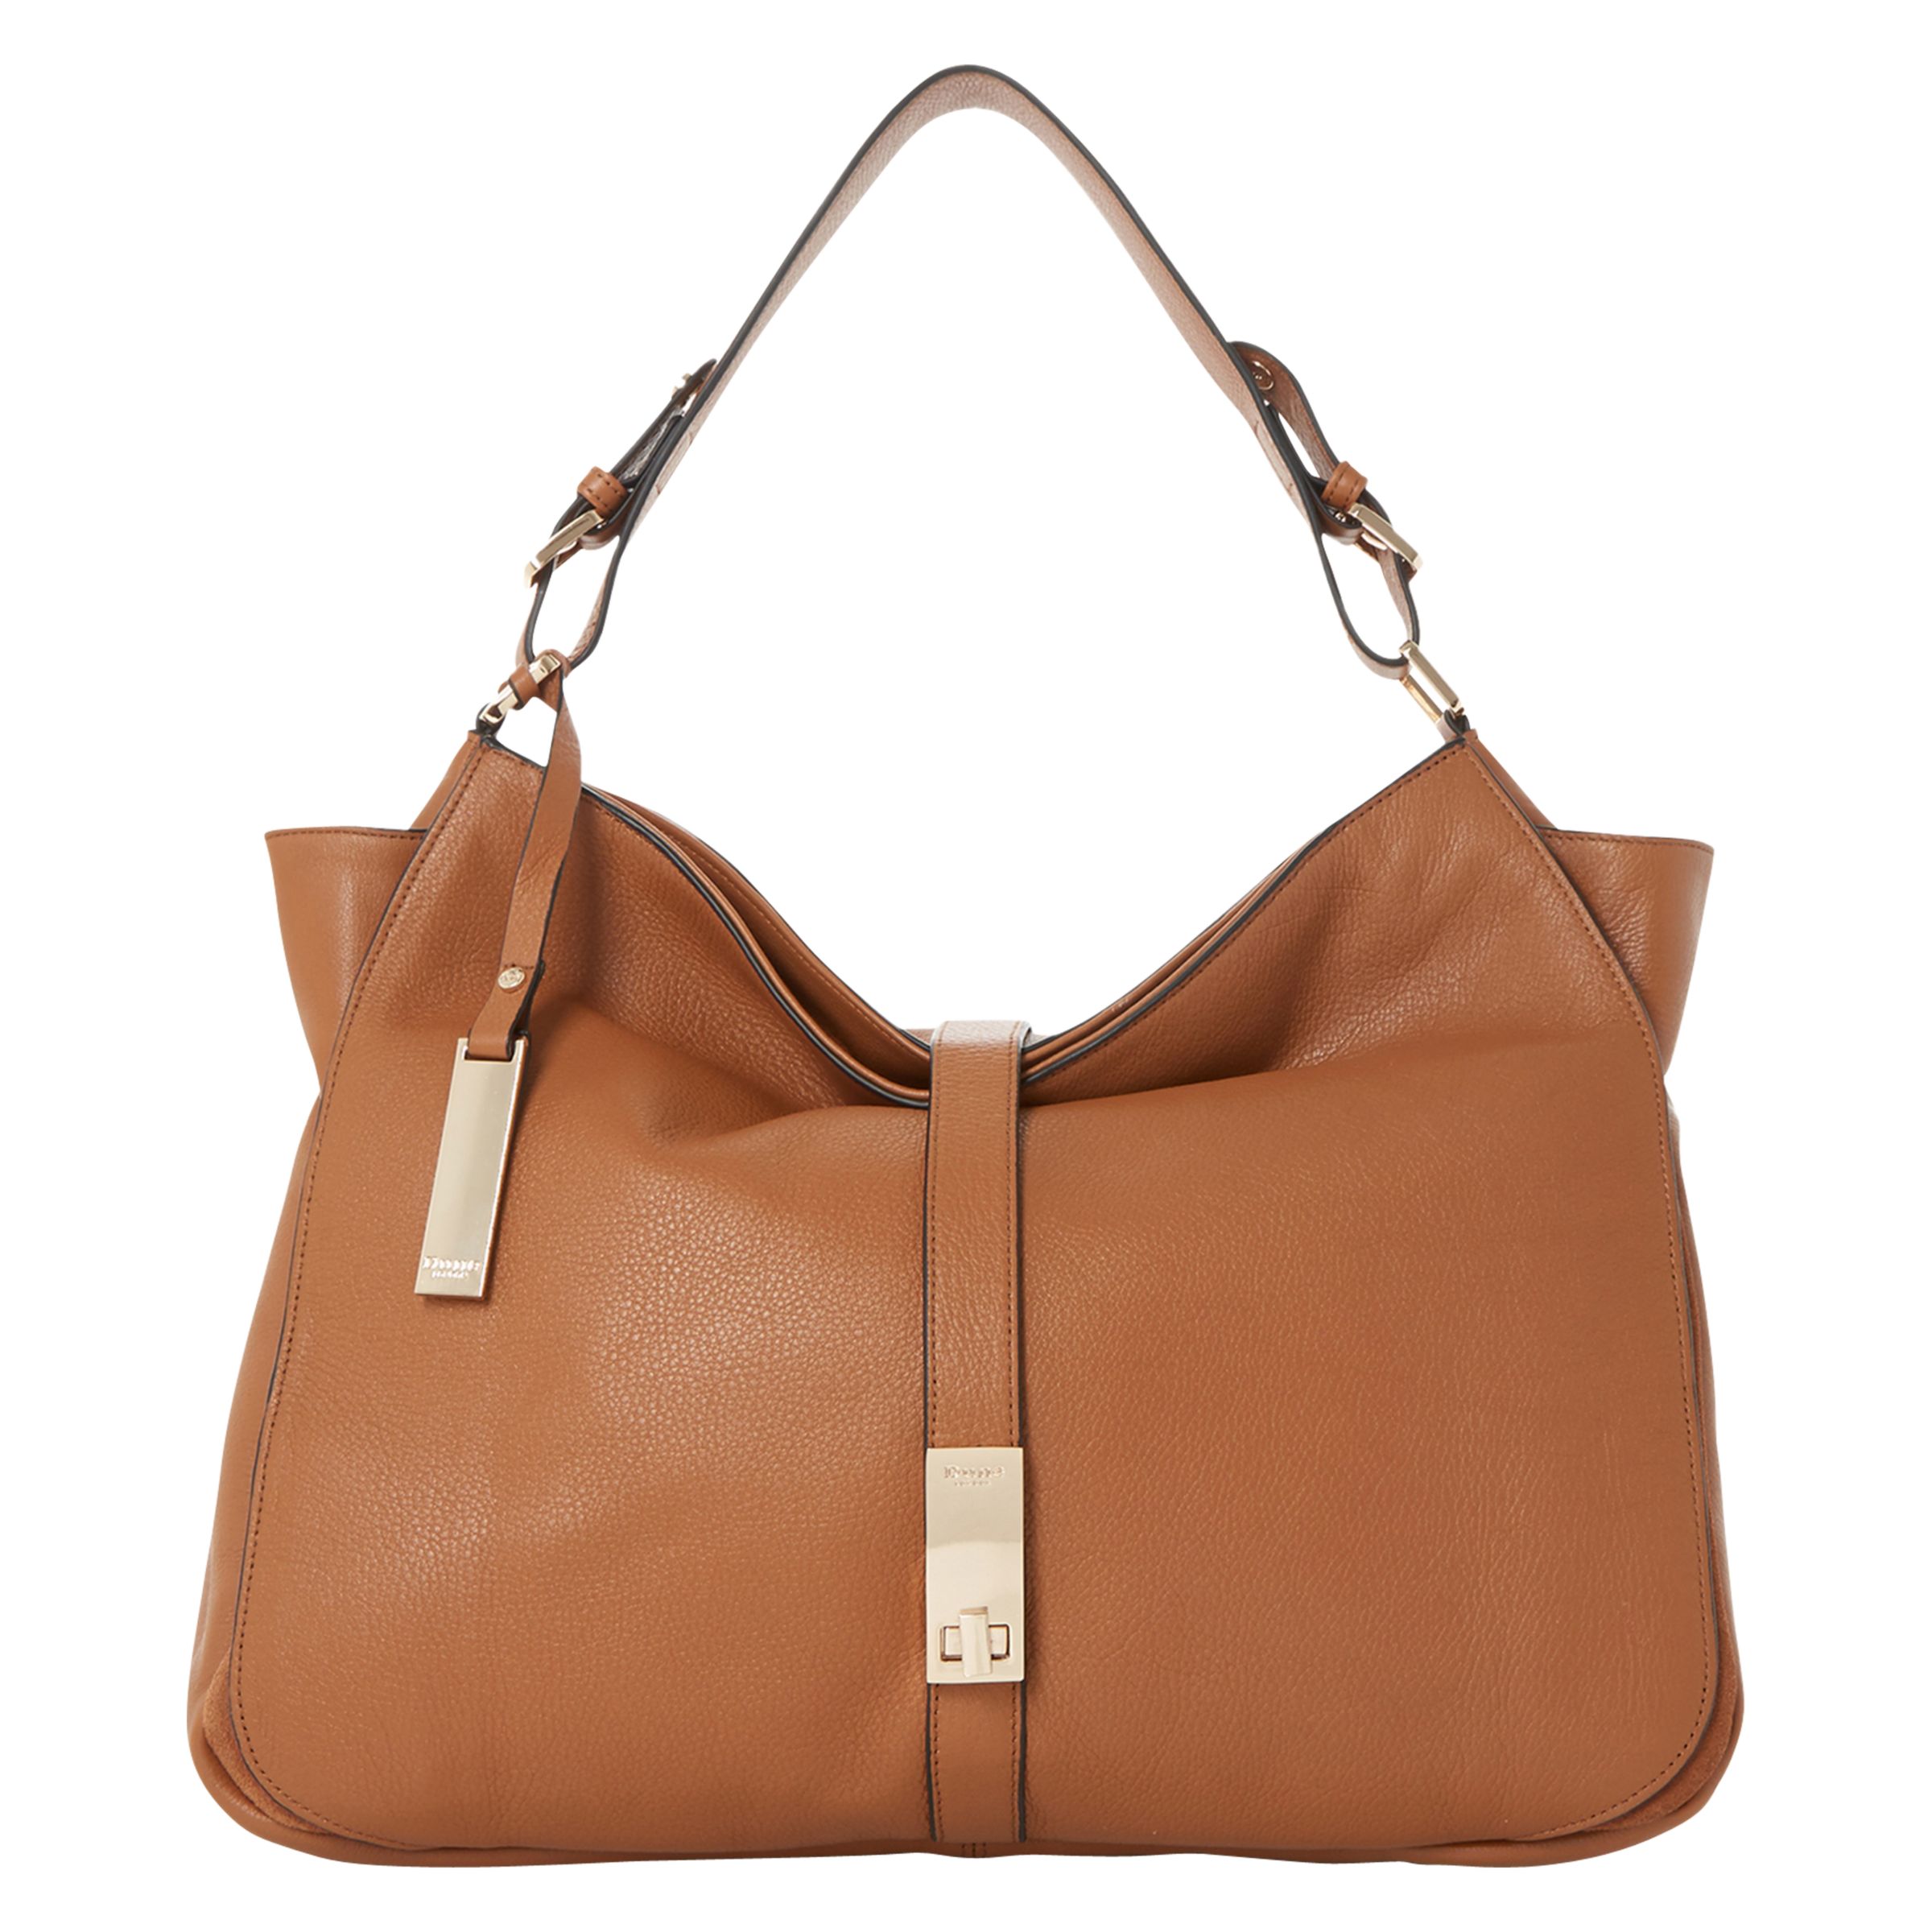 Dune Donnelly Leather Hobo Bag, Tan at John Lewis & Partners